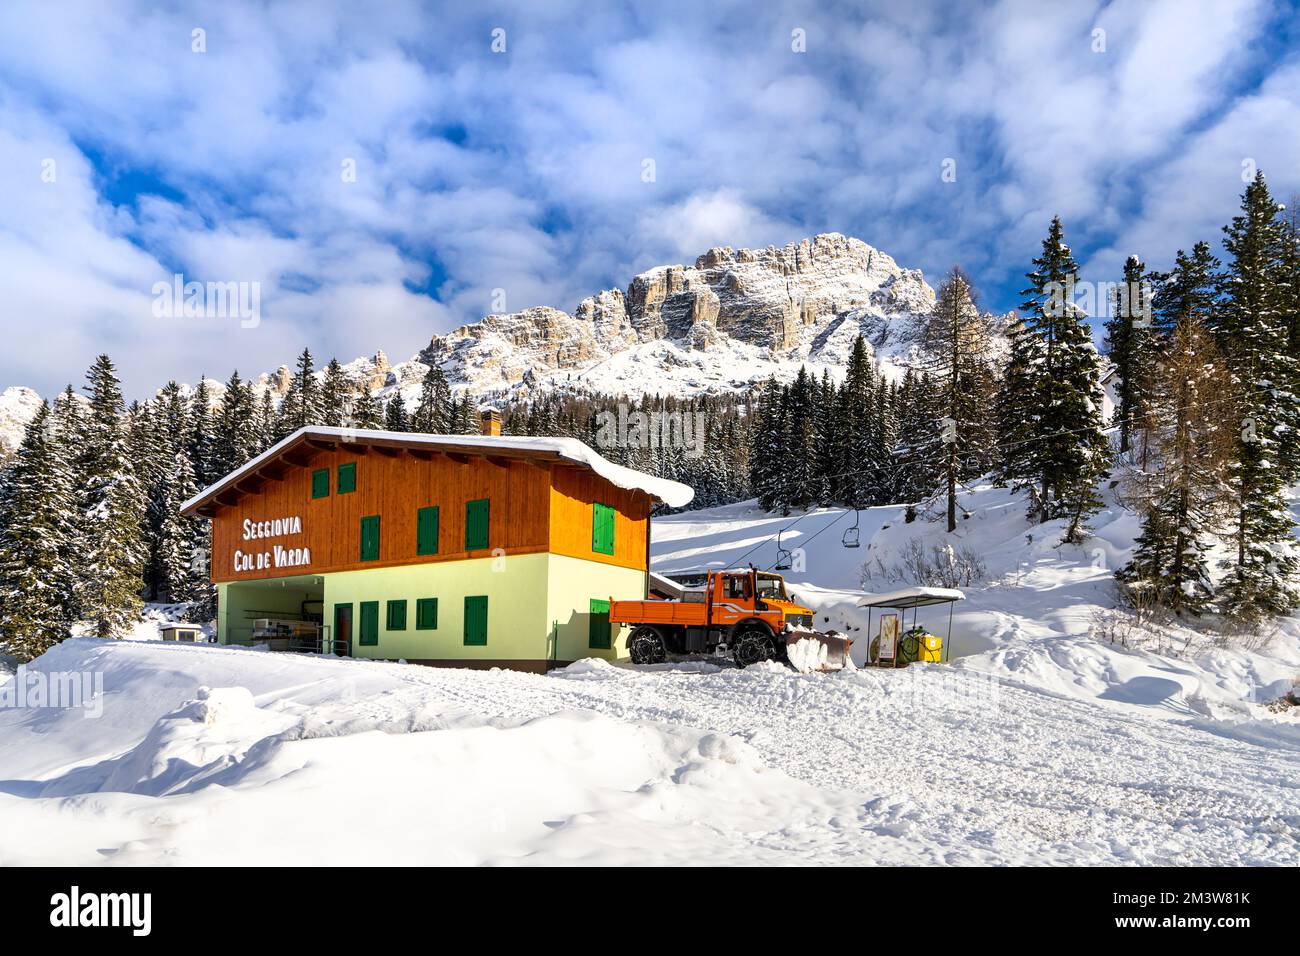 winter panoramic view of the Col de Varda chairlift at the Misurina lake, Italy, with snow. Stock Photo